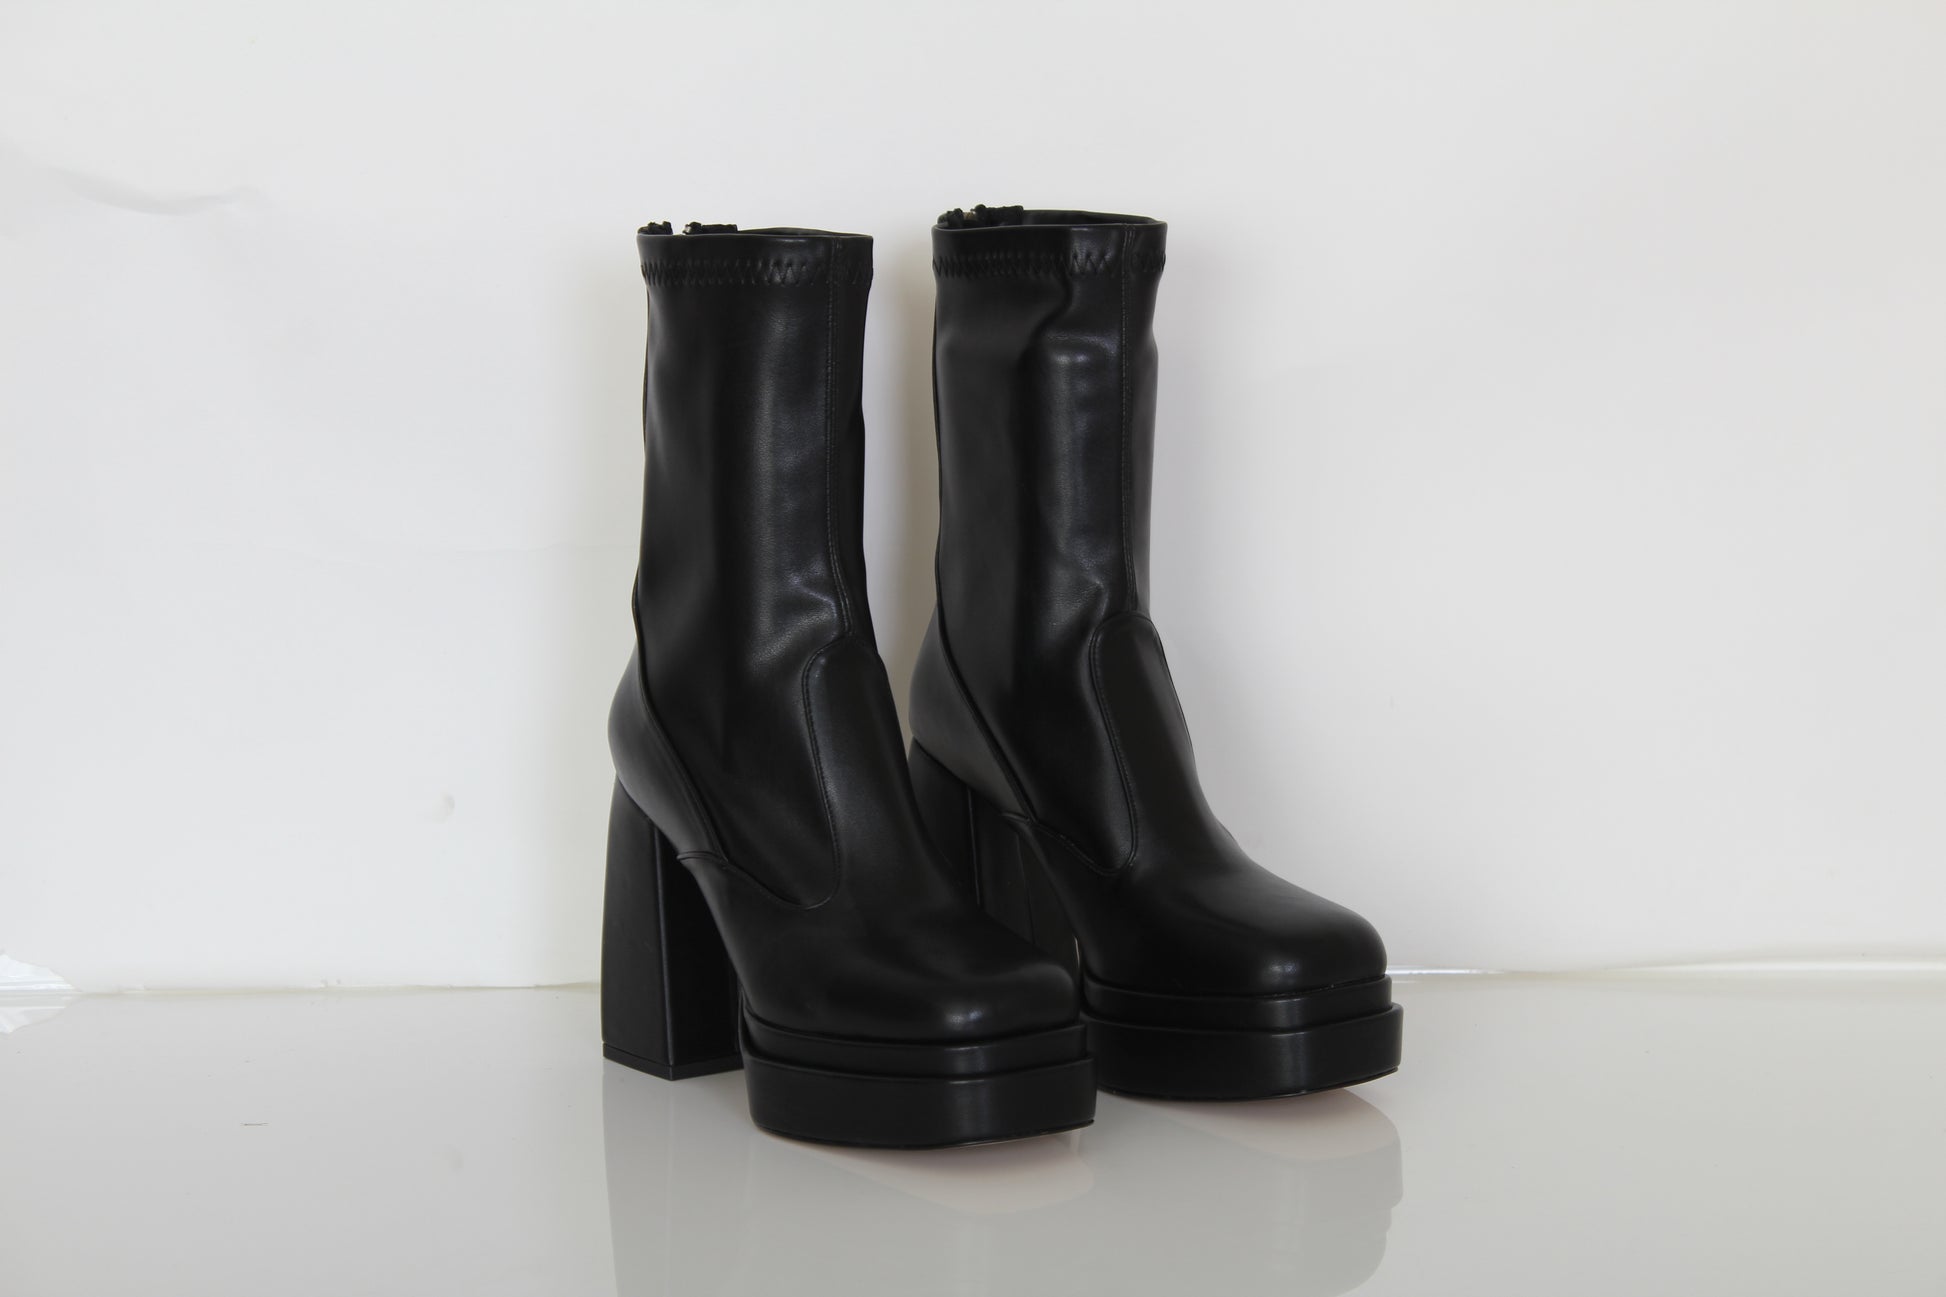 New Black boots for women